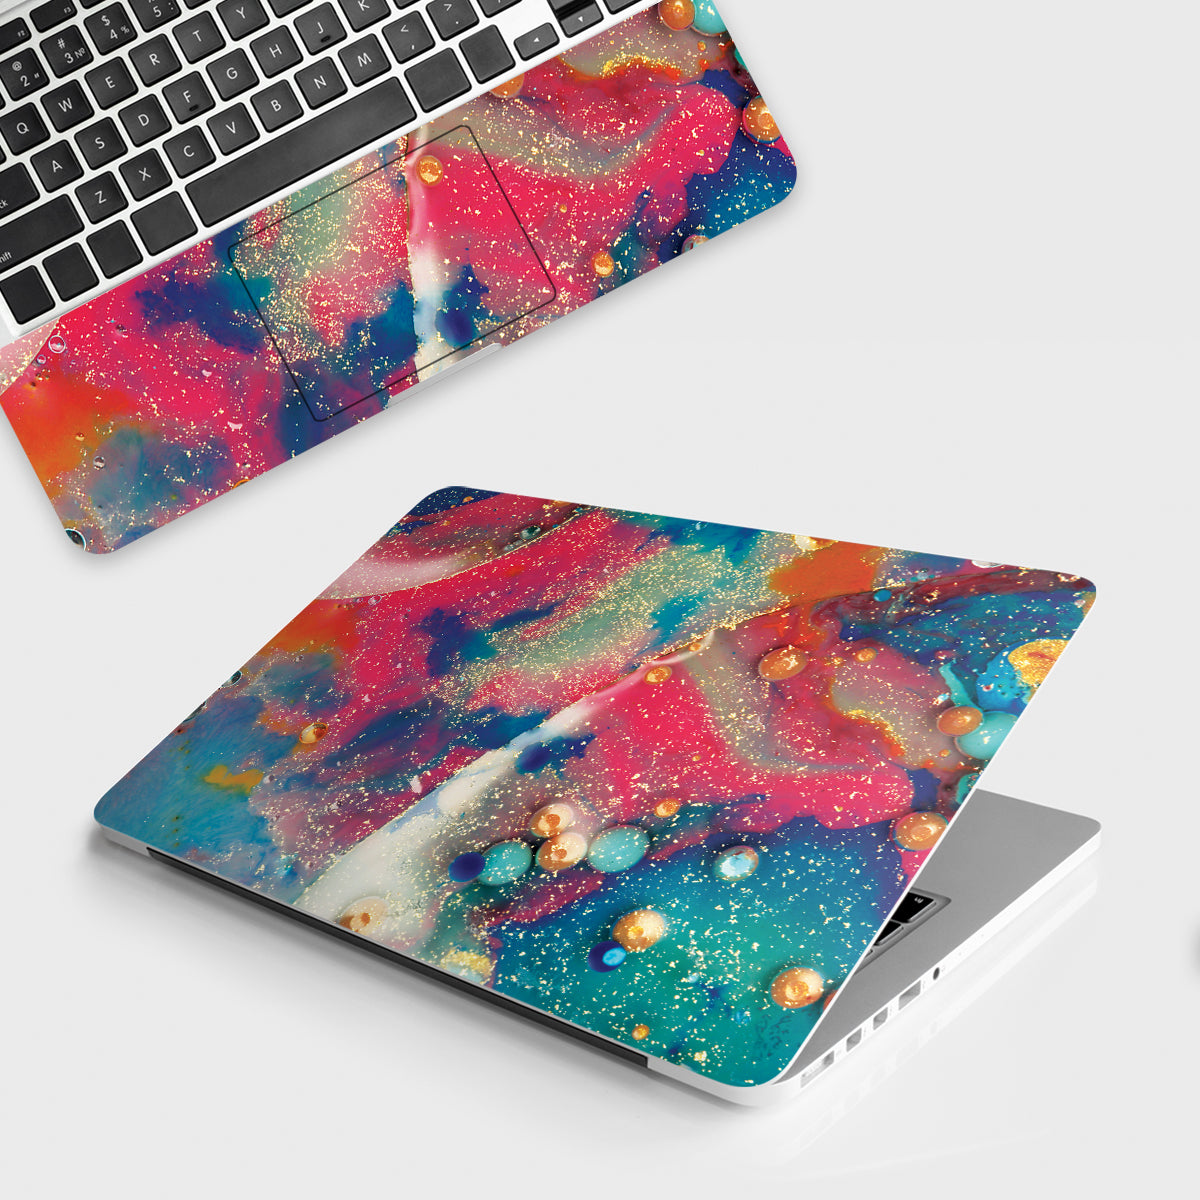 Fomo Store Laptop Skins Marble Colorful Design